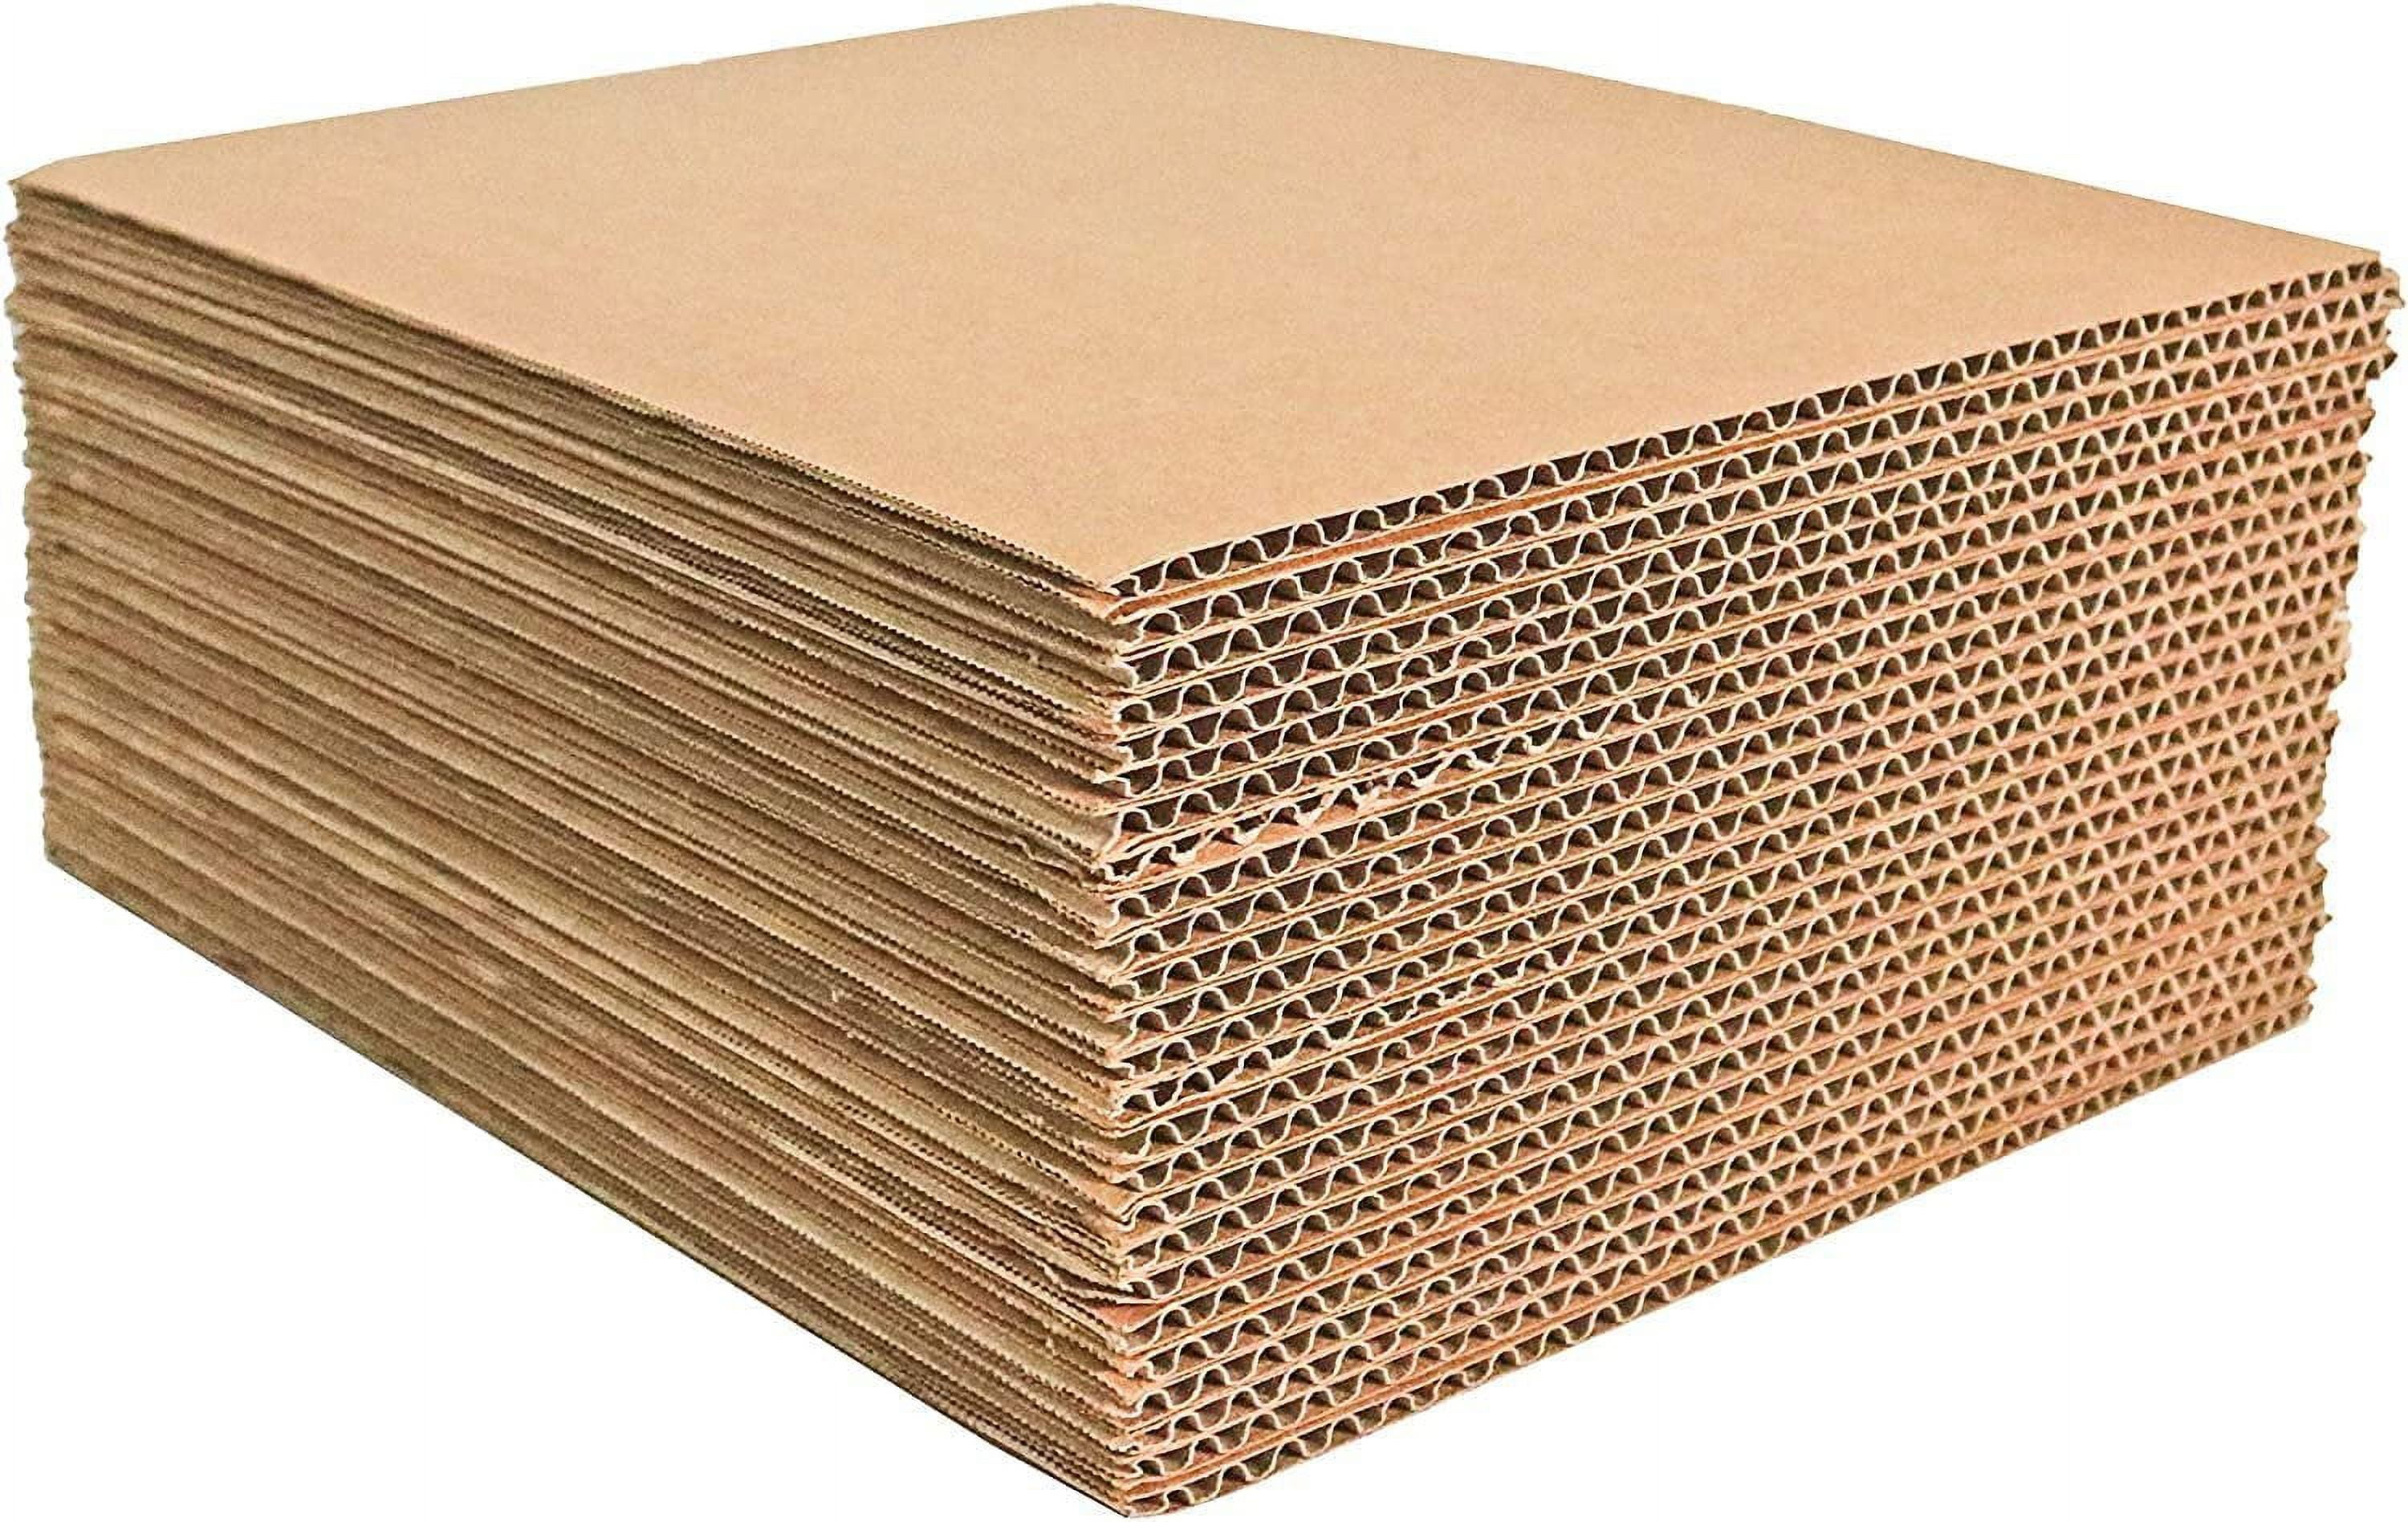 12 x 15 Inch Corrugated Cardboard Sheets Flat Layer Pads White rectangle  Separators Bulk Flat Card Boards Inserts for Packing,  Shipping,Art,Mailing,Diy Crafts,T-Shirts，Divider Backing 50 Pack - Yahoo  Shopping